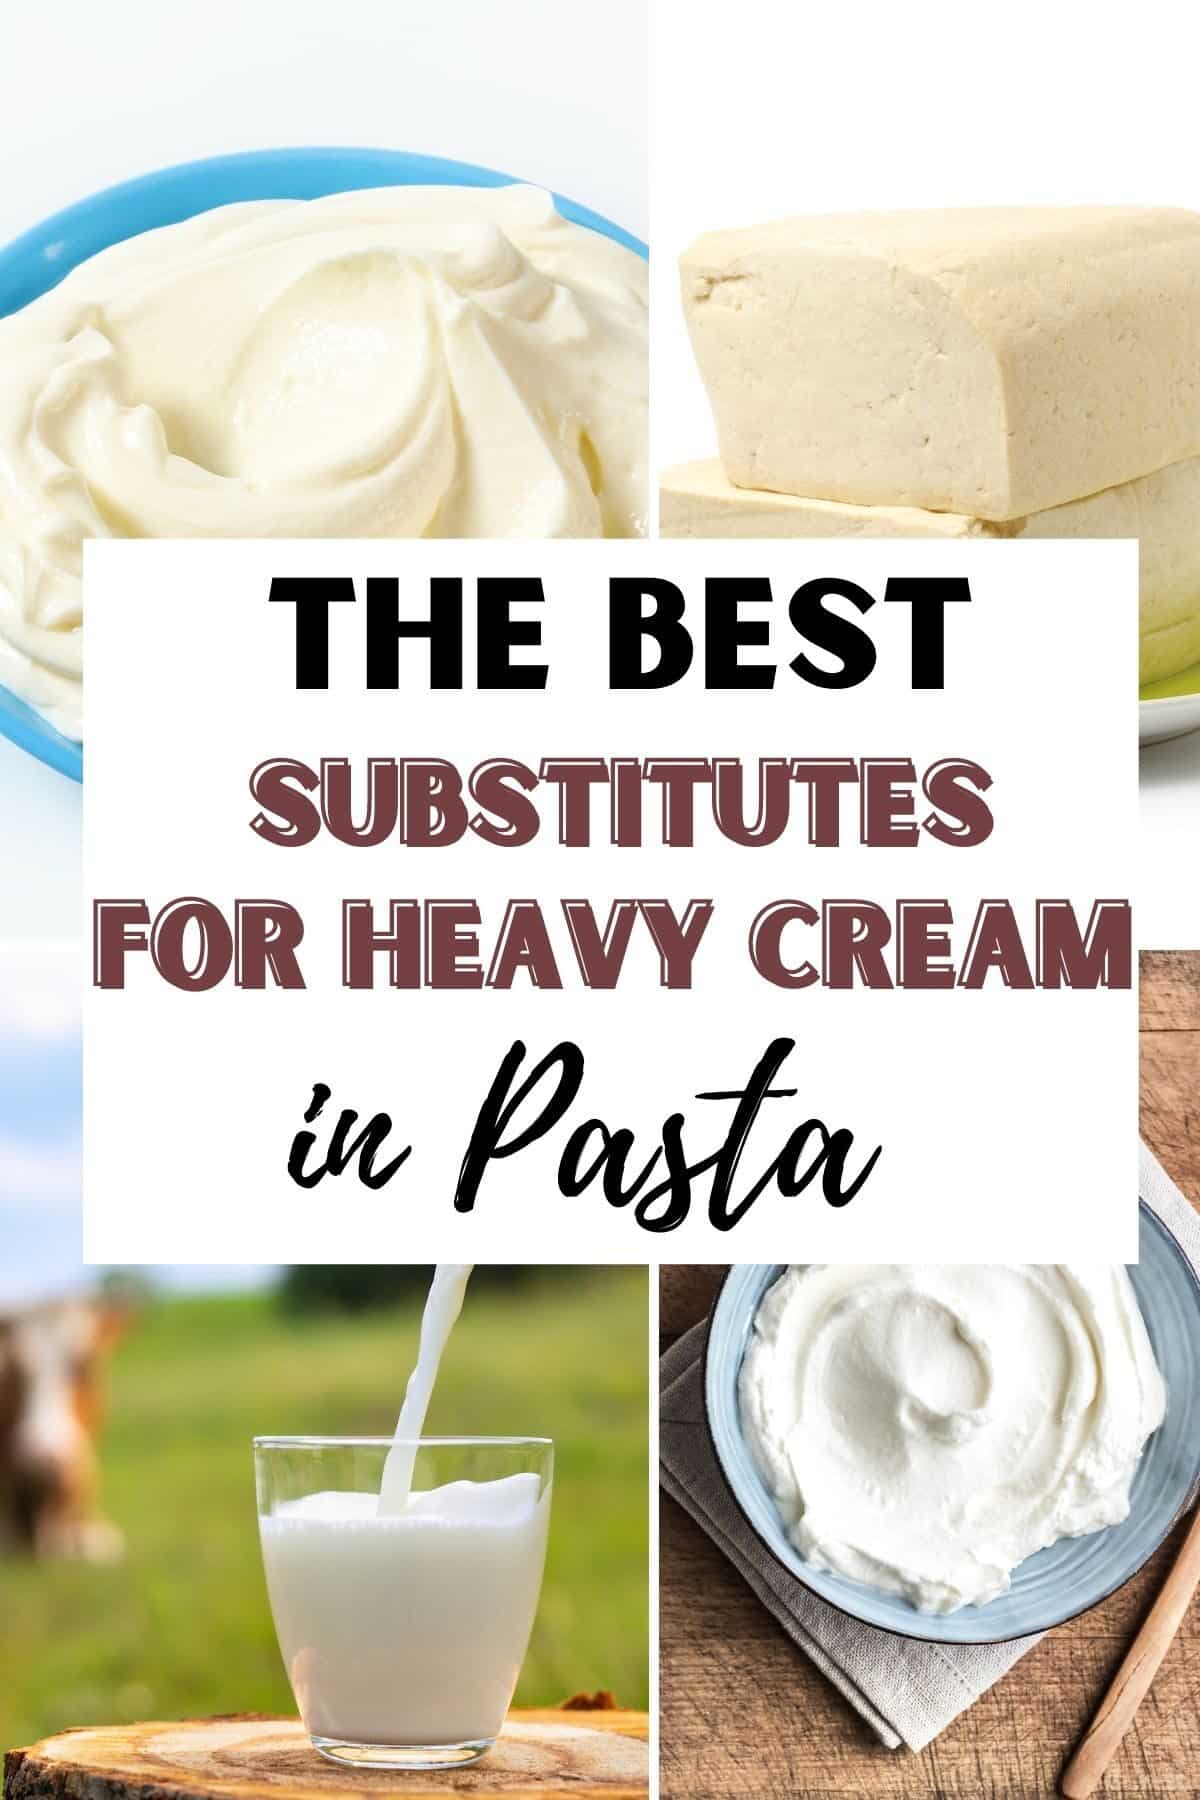 A collage showing the best substitutes for heavy cream in pasta.